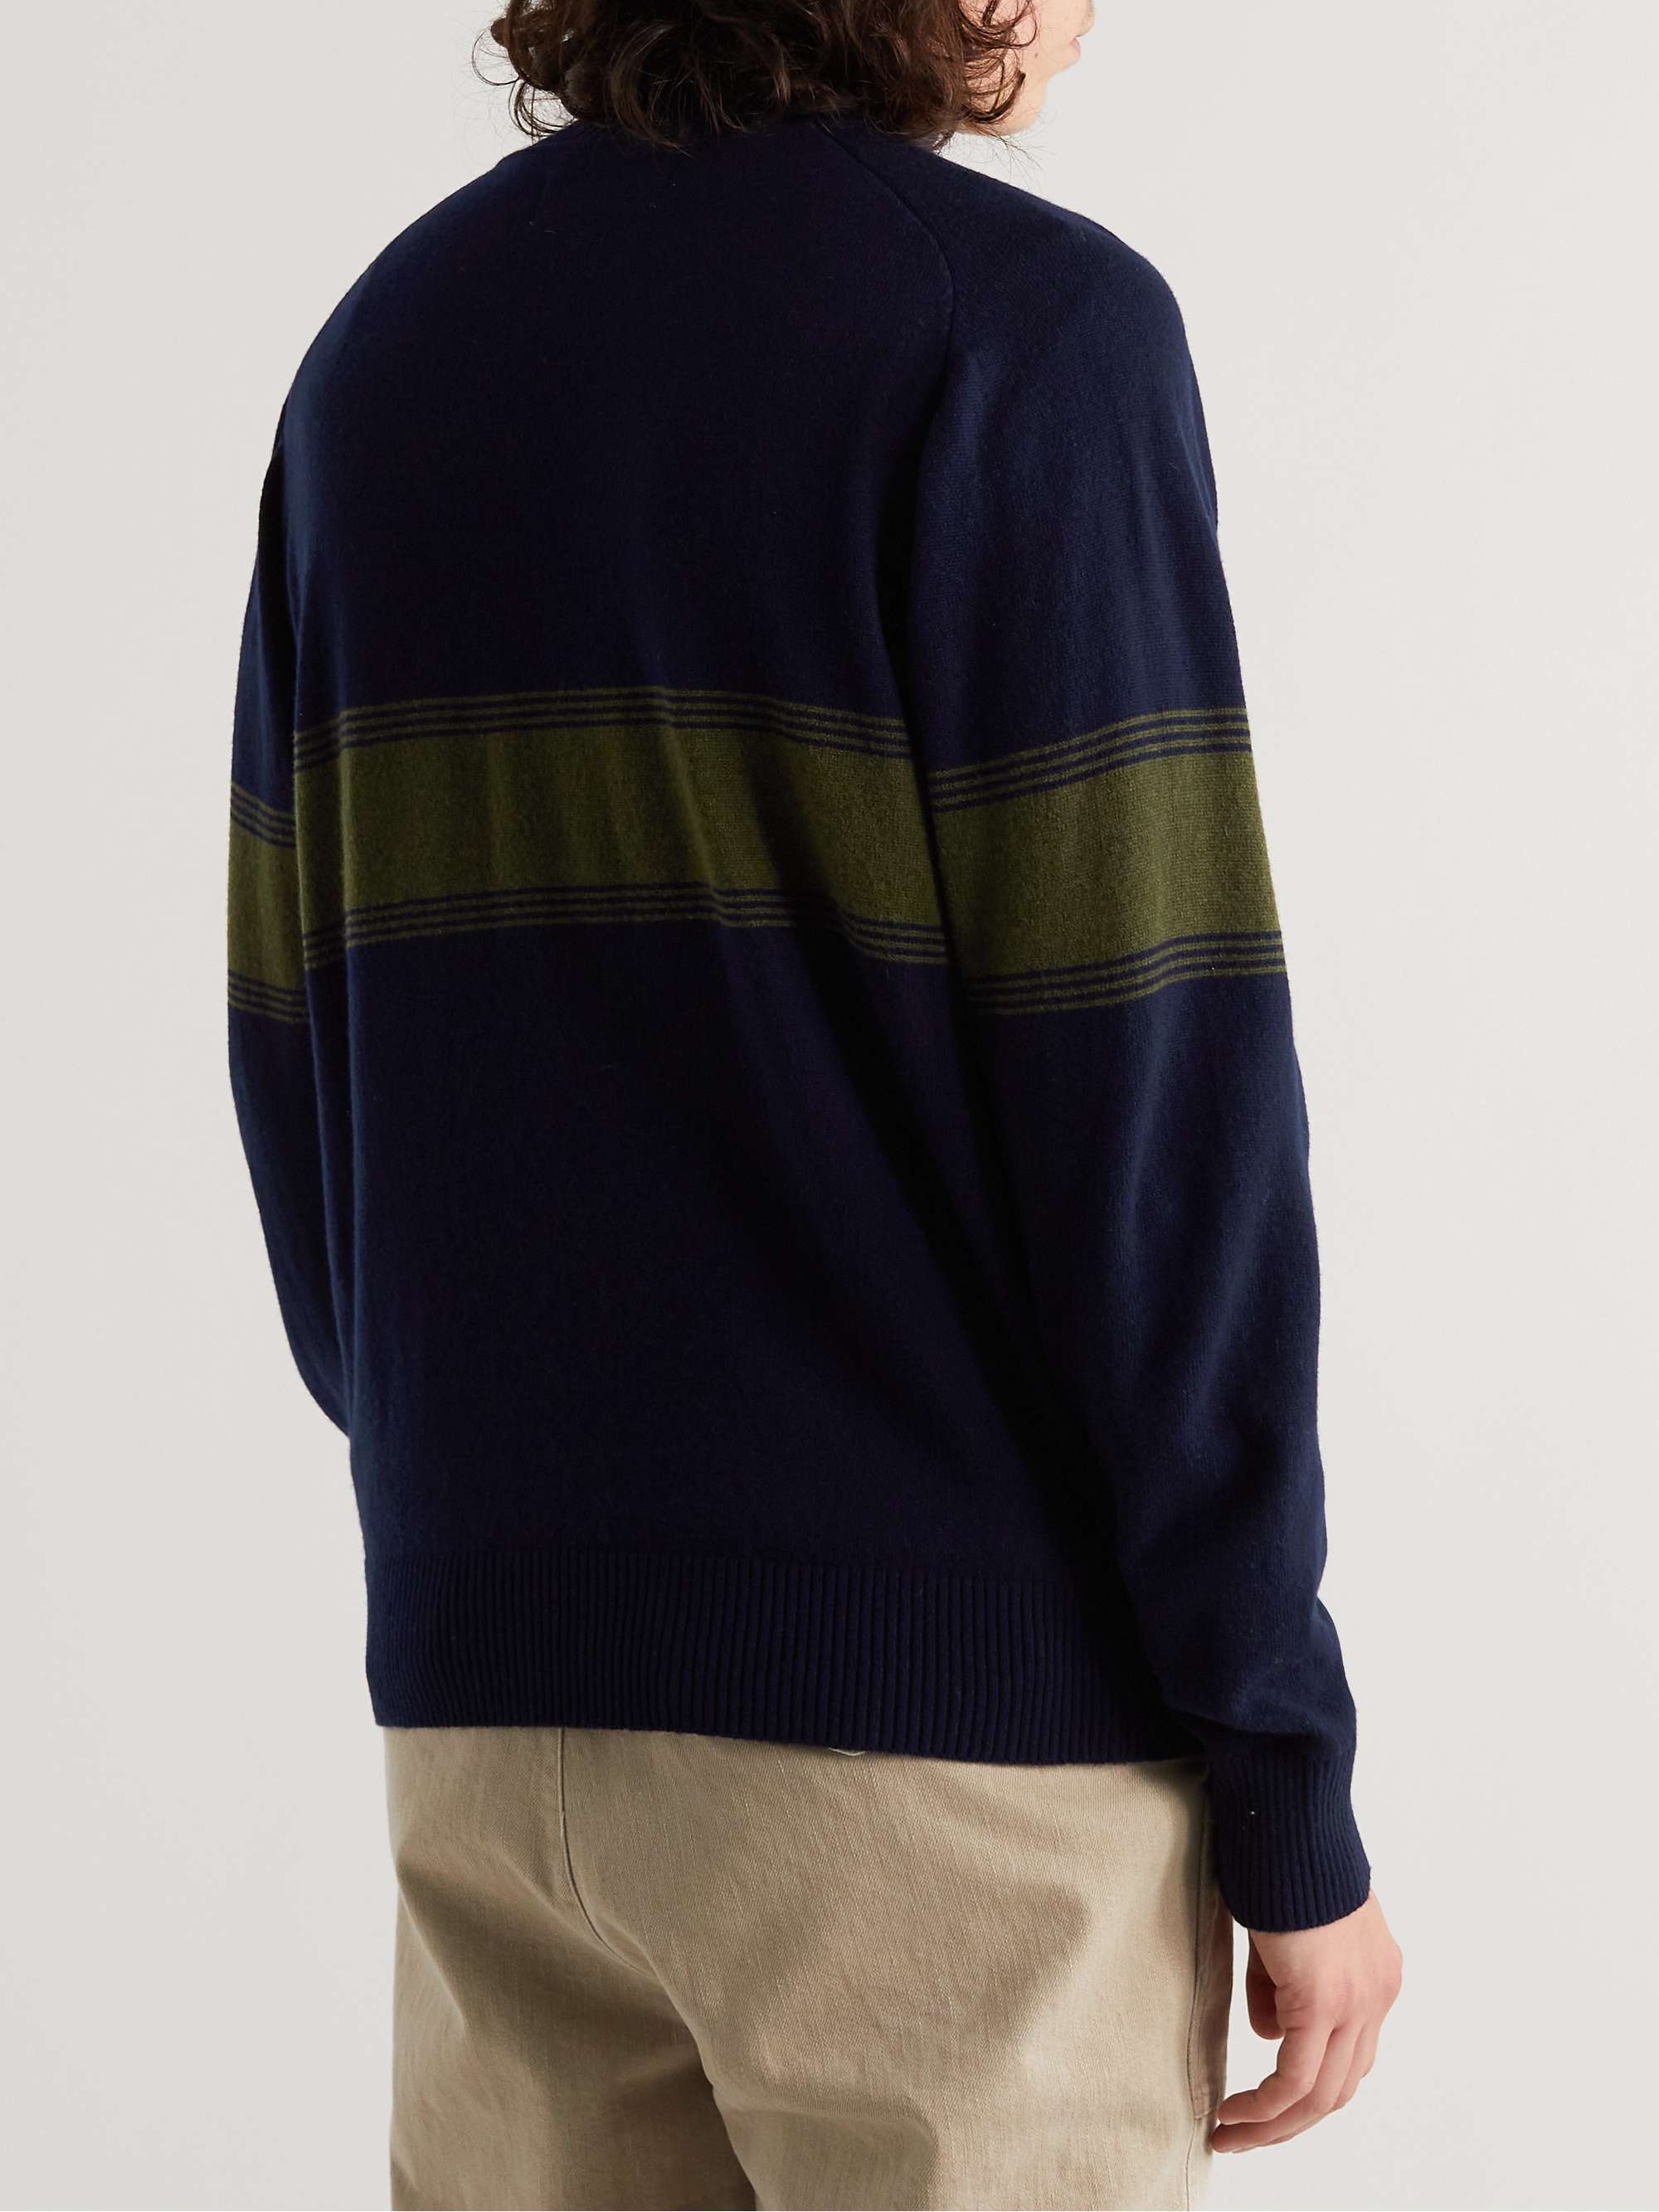 ANONYMOUS ISM Striped Wool Rollneck Sweater for Men | MR PORTER